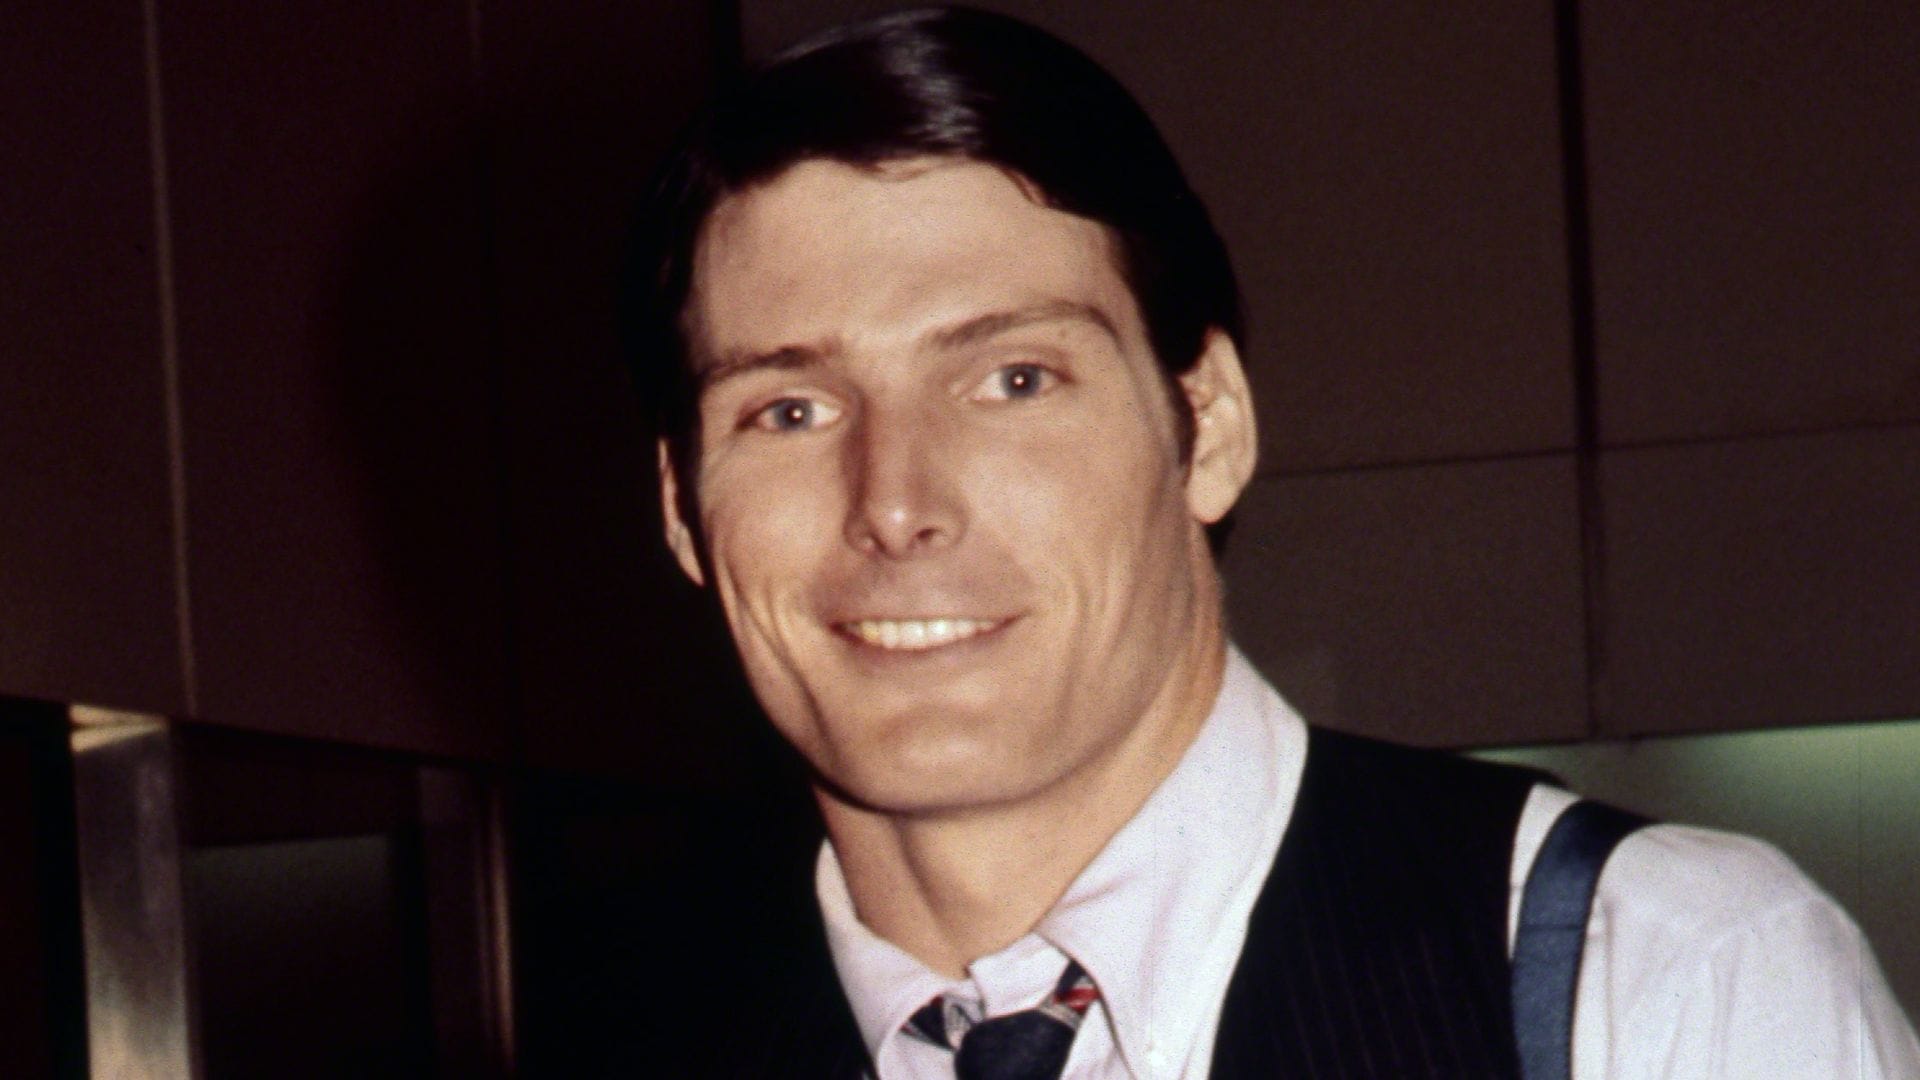 Christopher Reeve's son will have a cameo in new 'Superman' movie